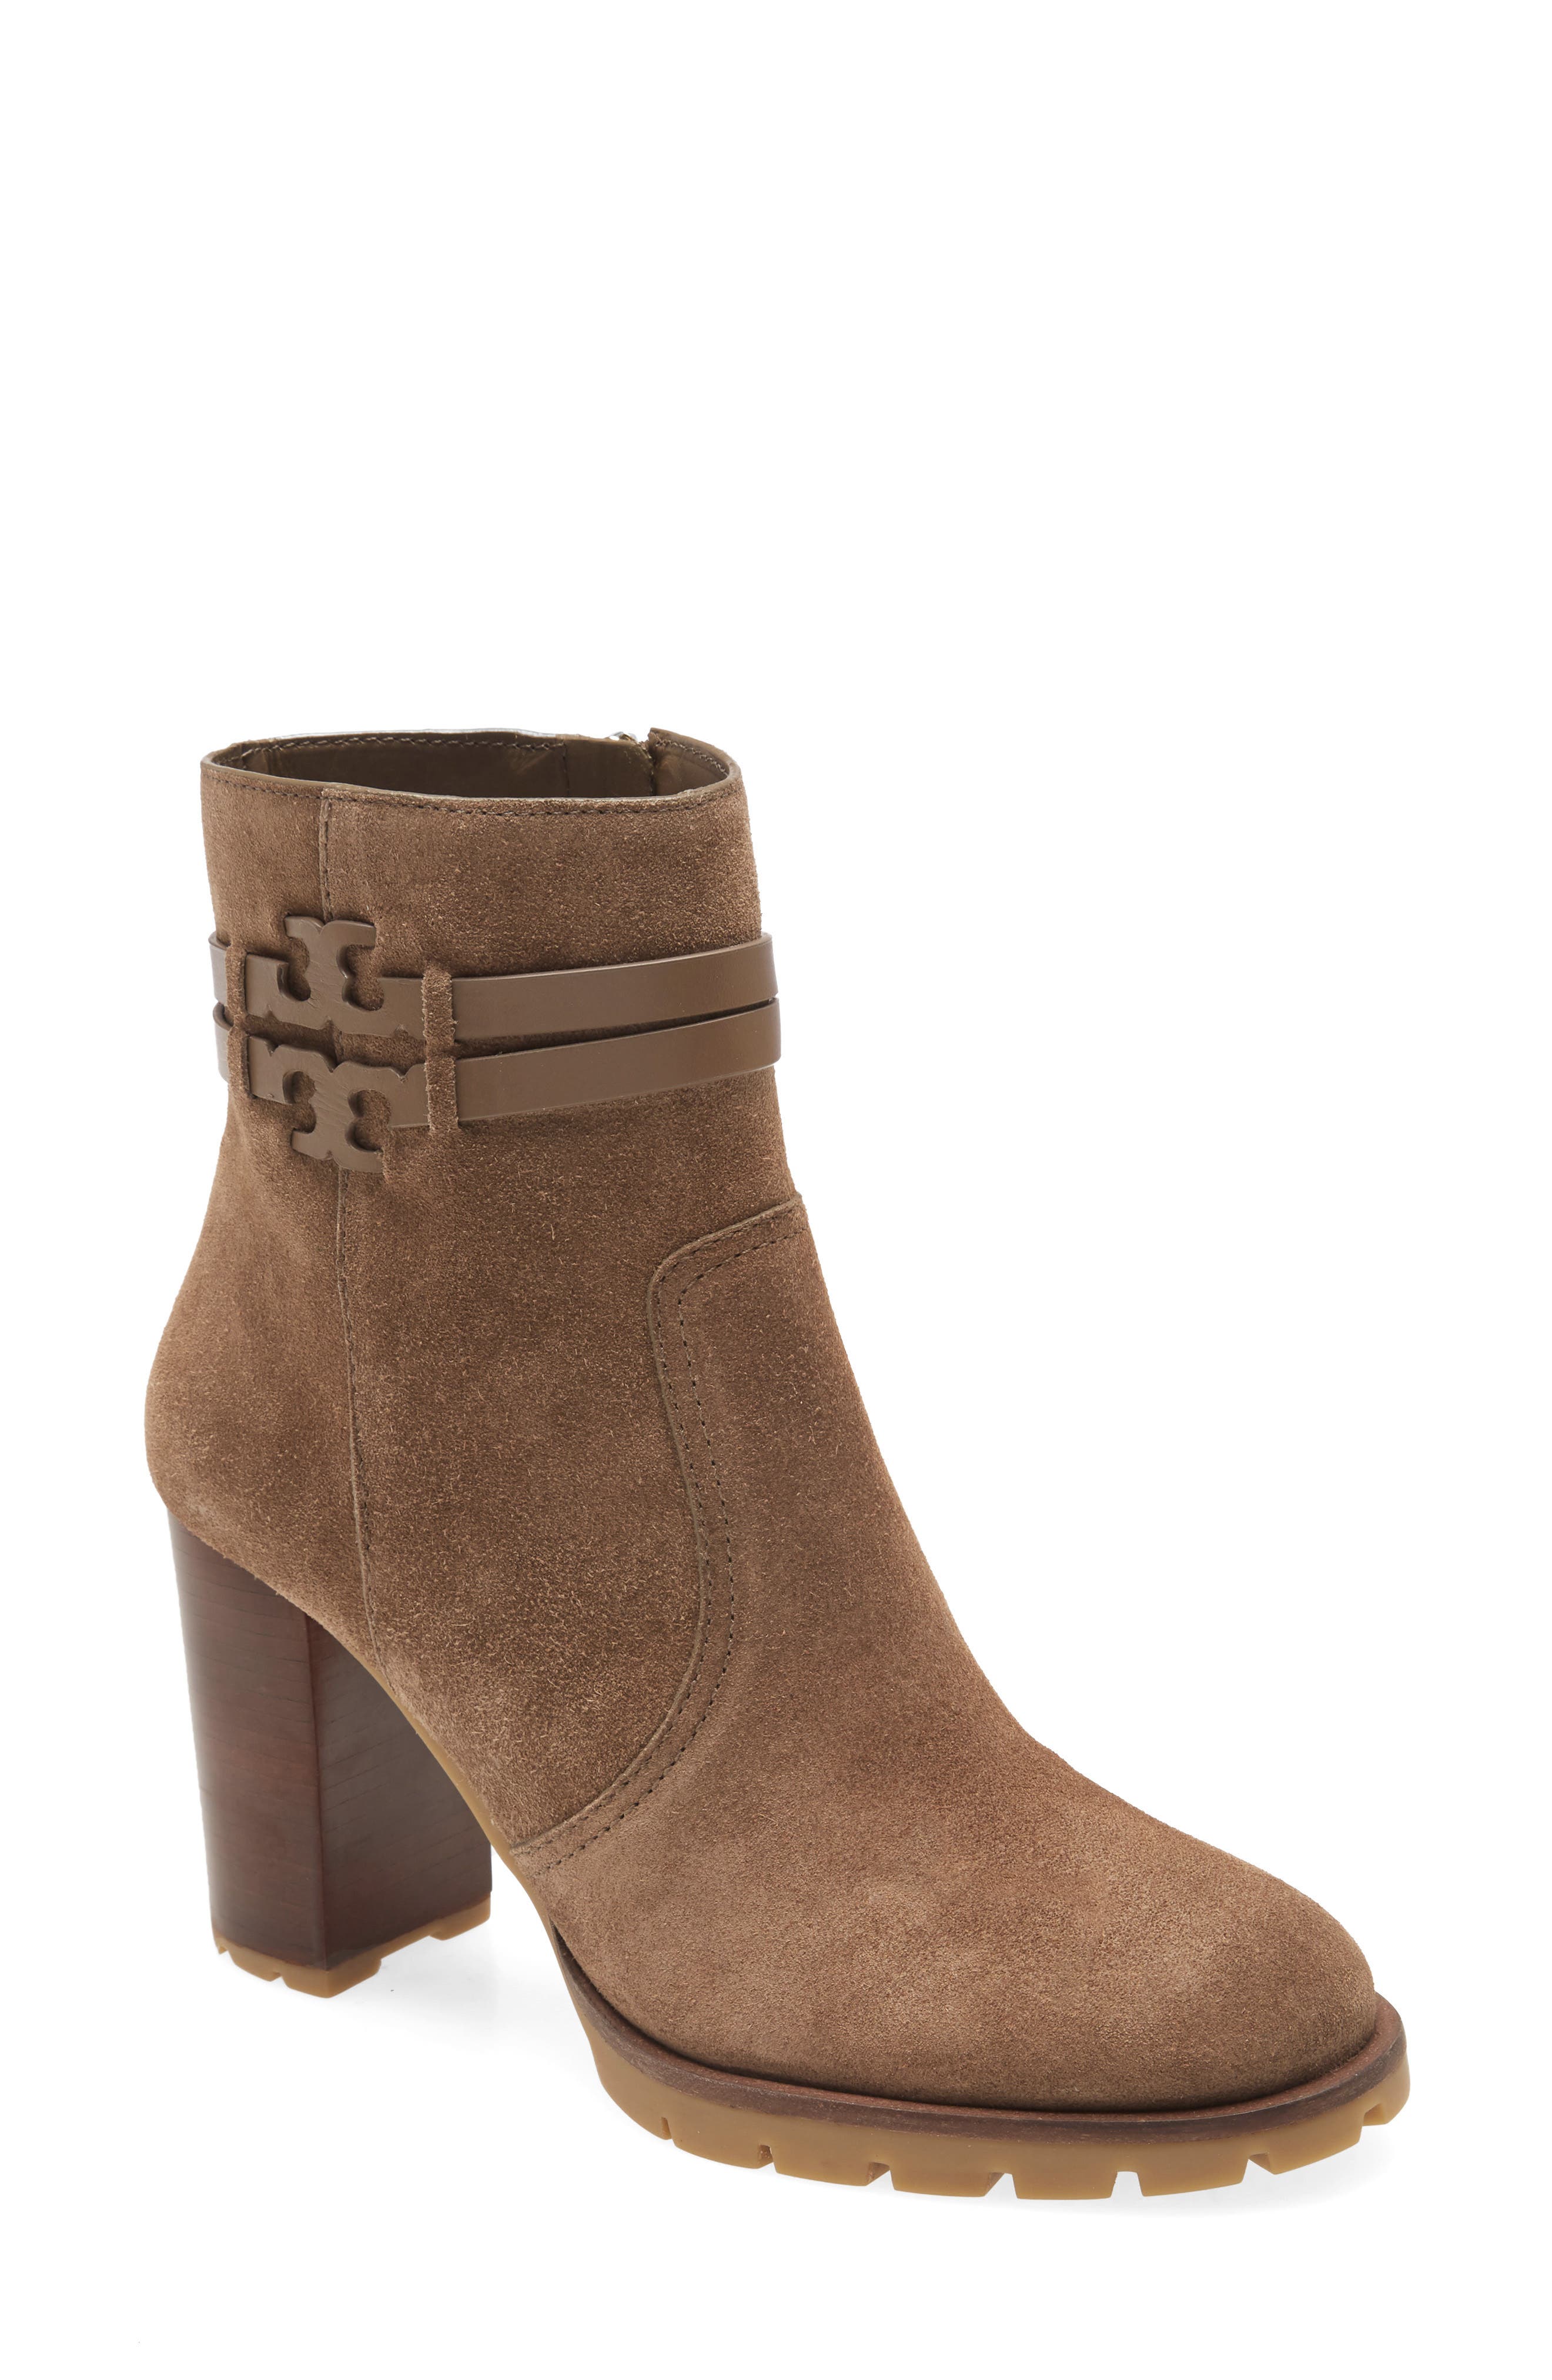 nordstrom womens boots sale